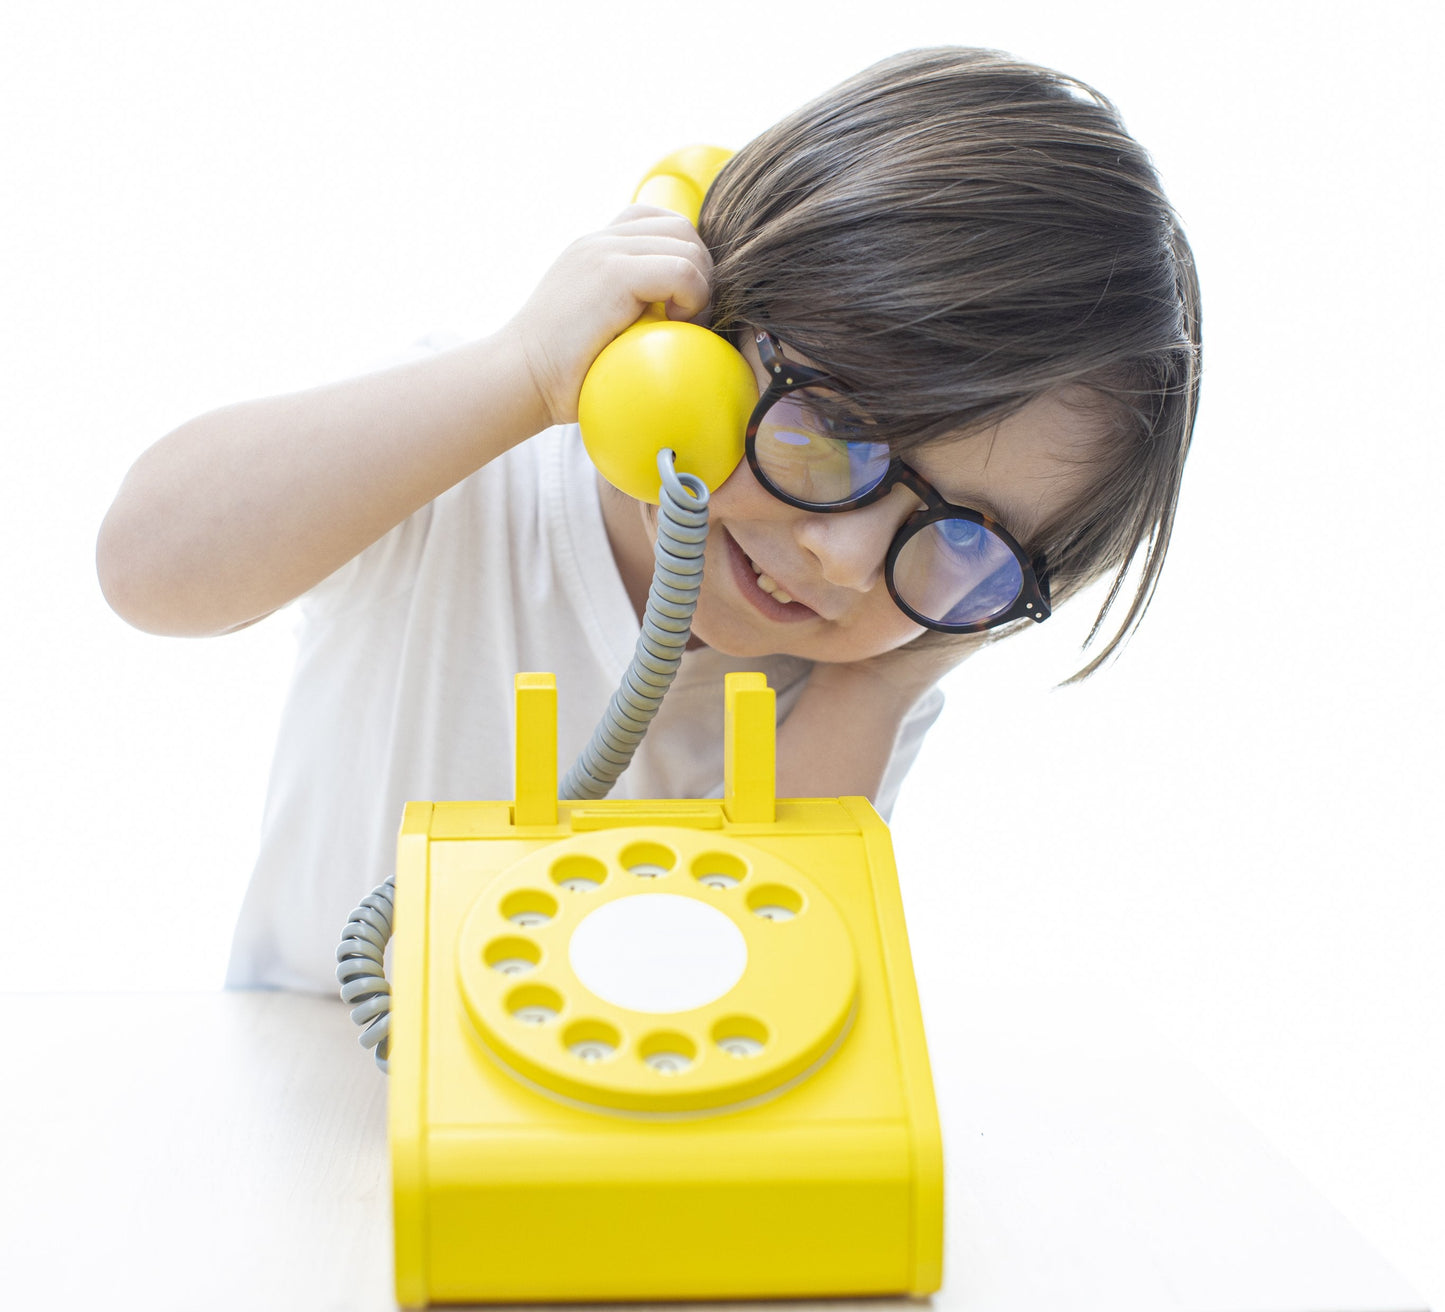 Wooden kids telephone with coins - Yellow